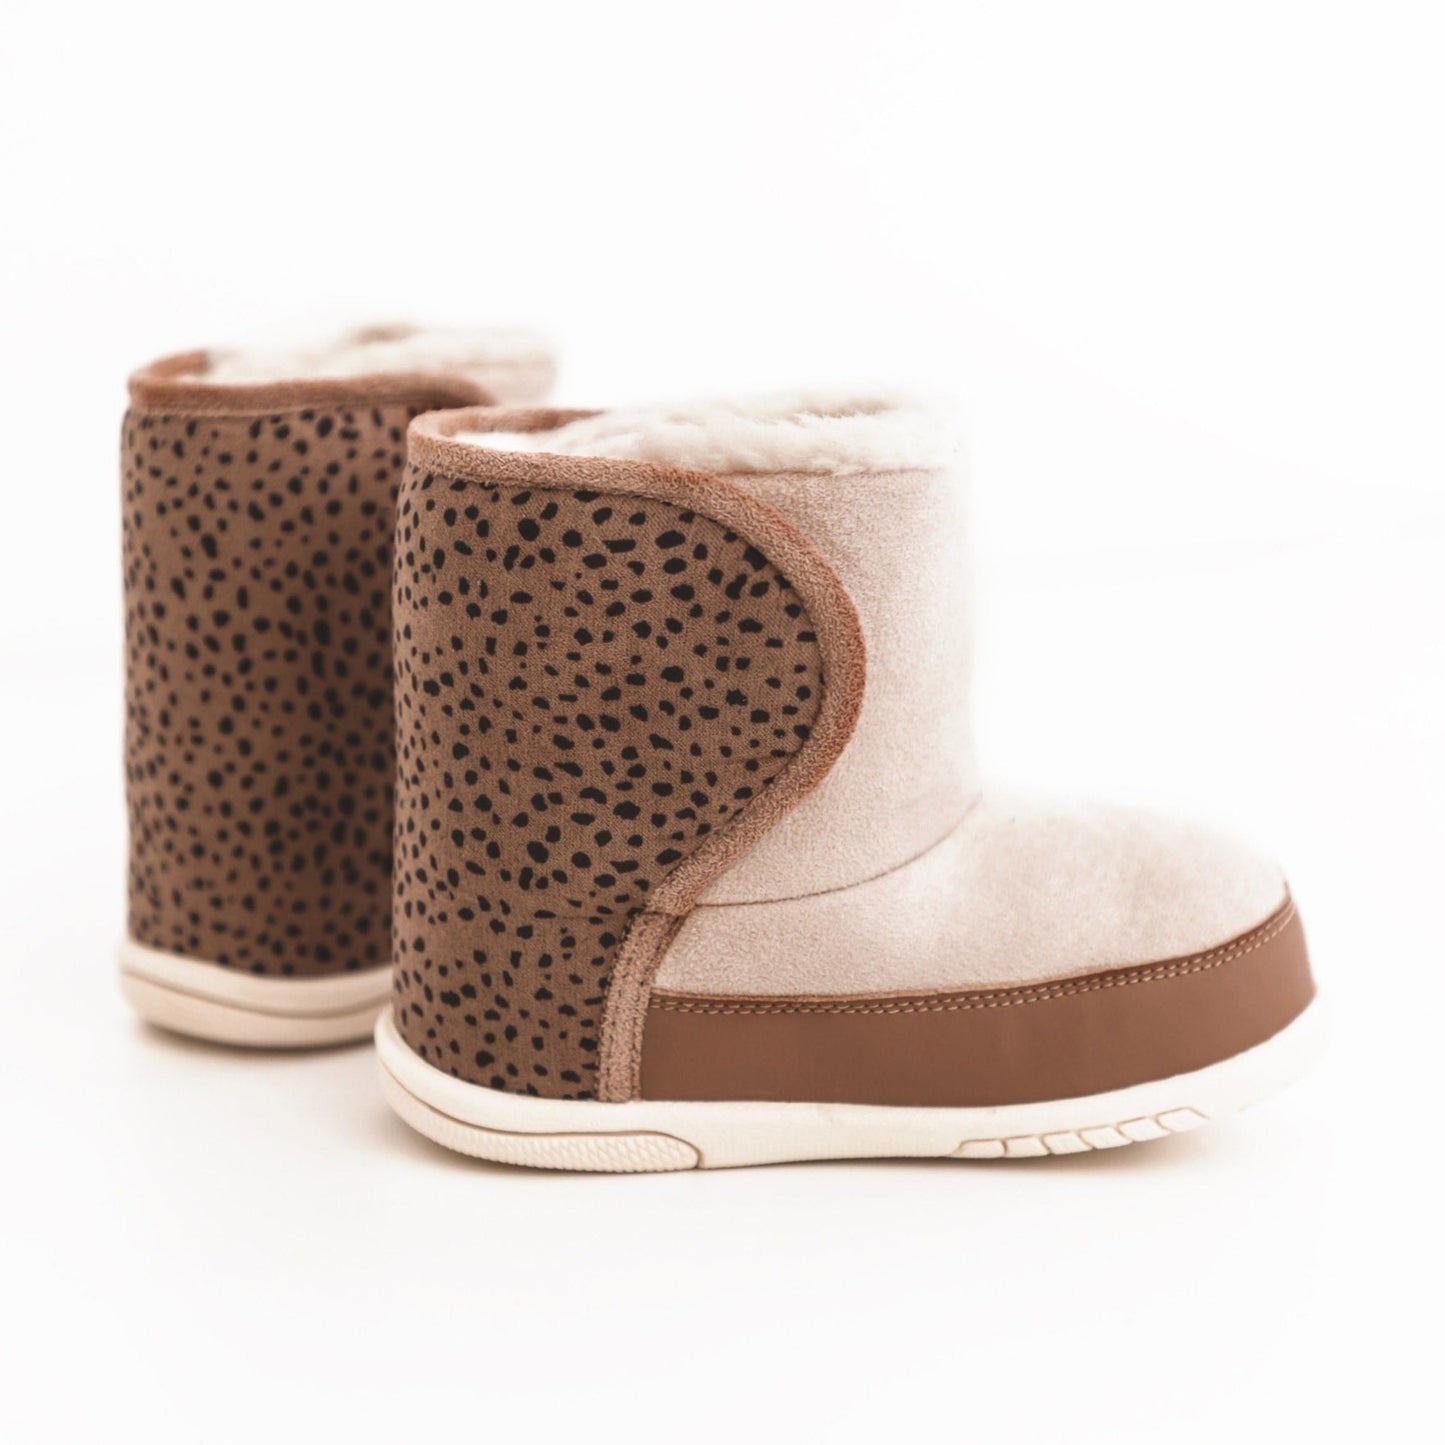 Children's Lined Boots - Frizzies - Nude Savanna